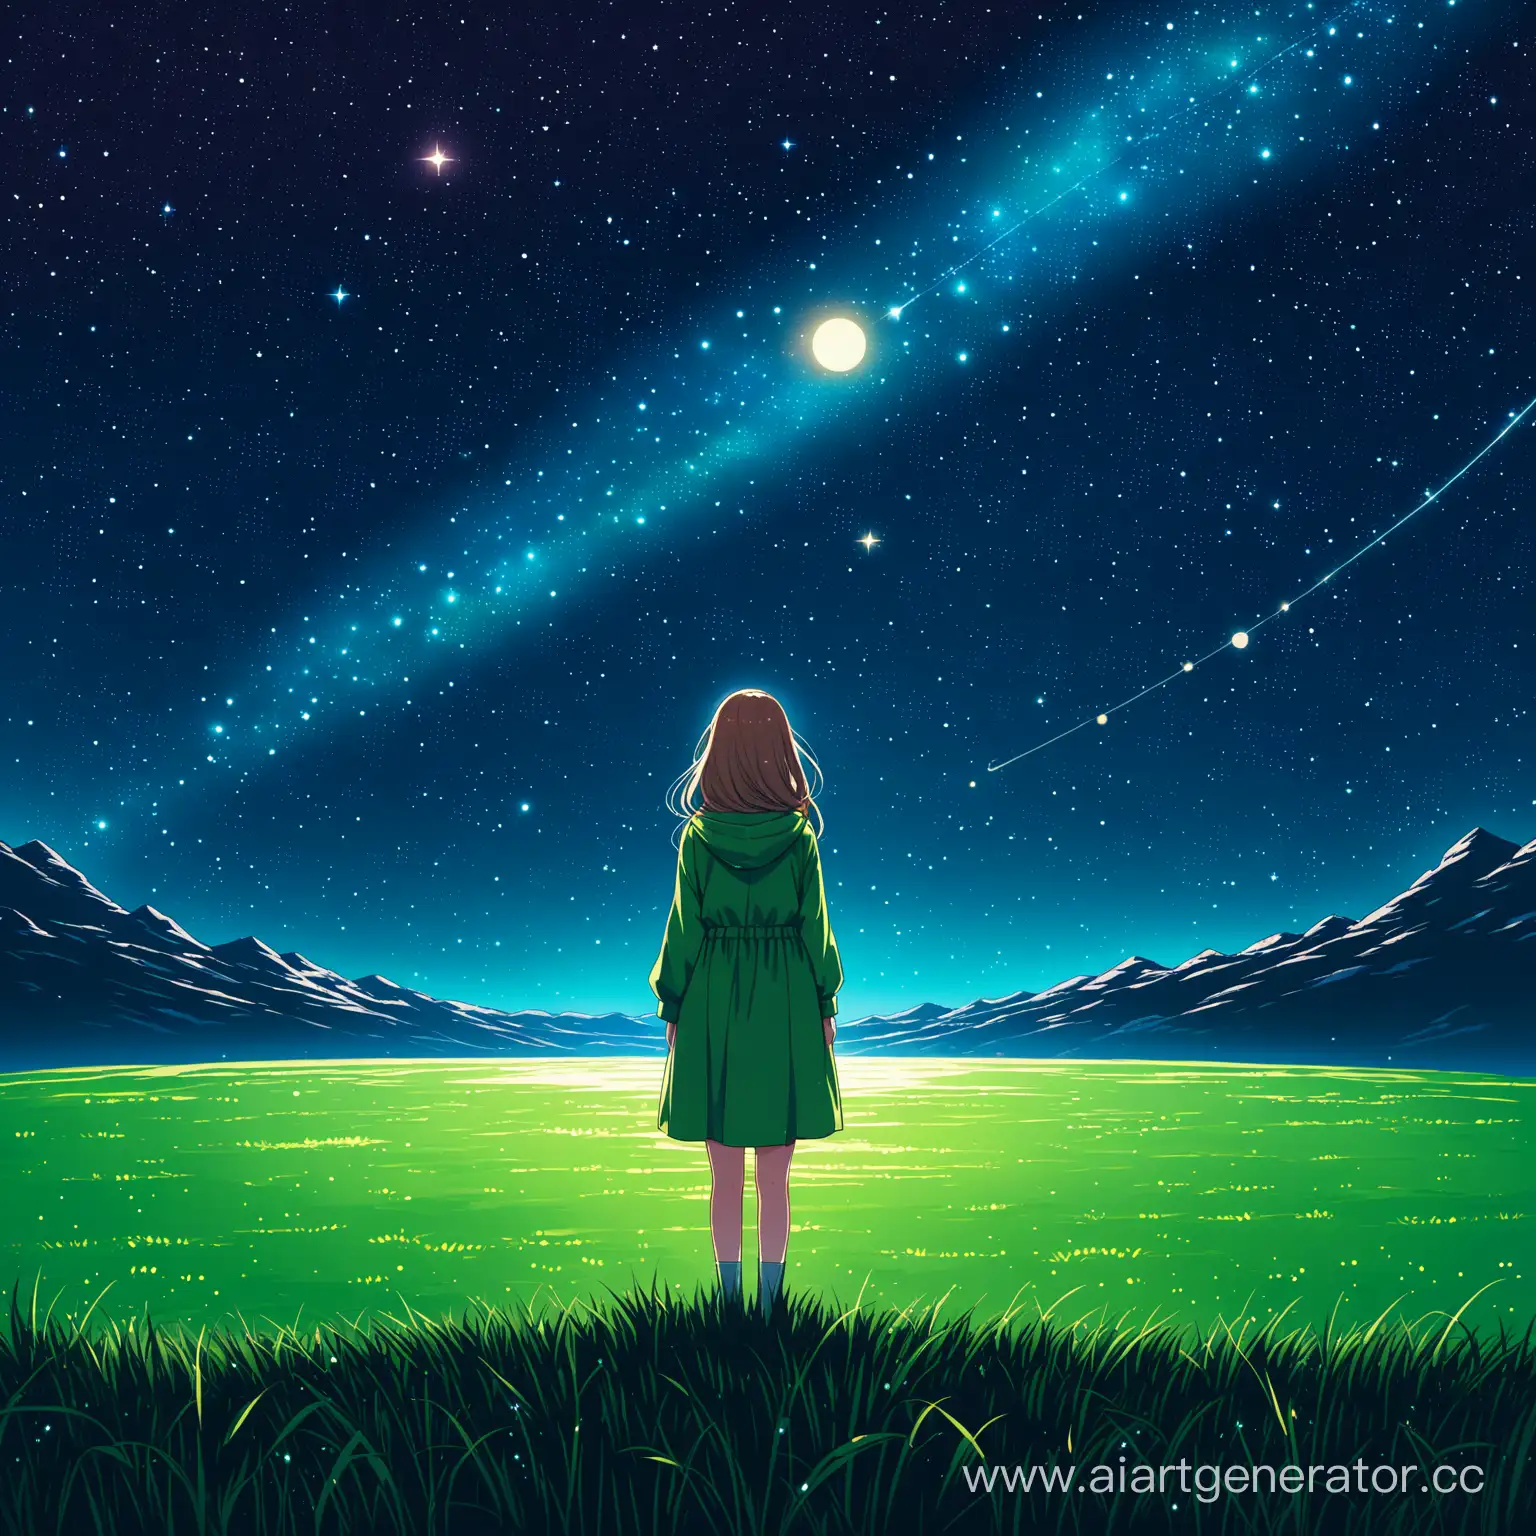 Girl-Standing-on-Green-Grass-Under-Starry-Sky-with-Visible-Planets